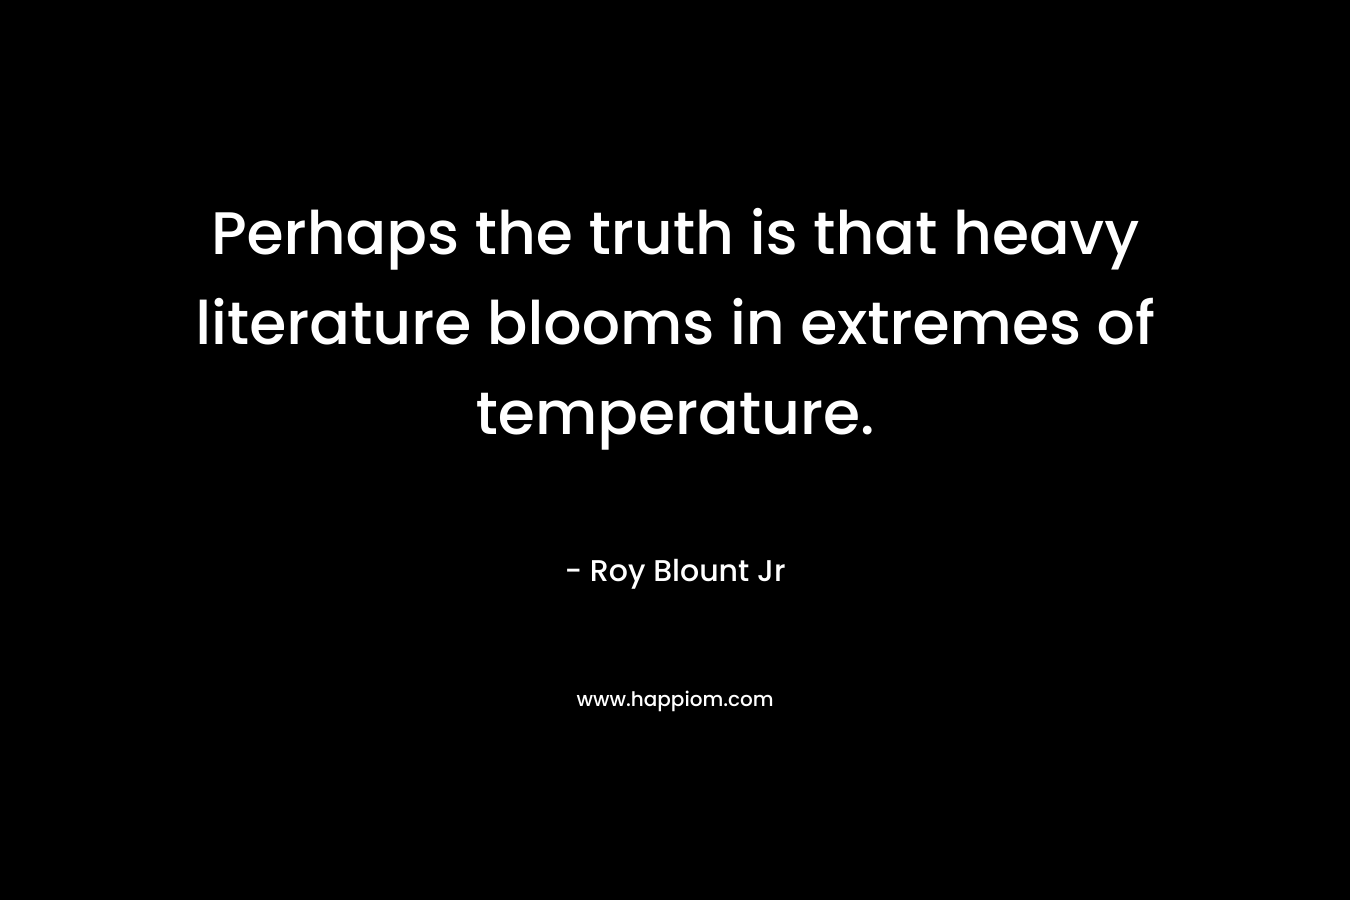 Perhaps the truth is that heavy literature blooms in extremes of temperature. – Roy Blount Jr